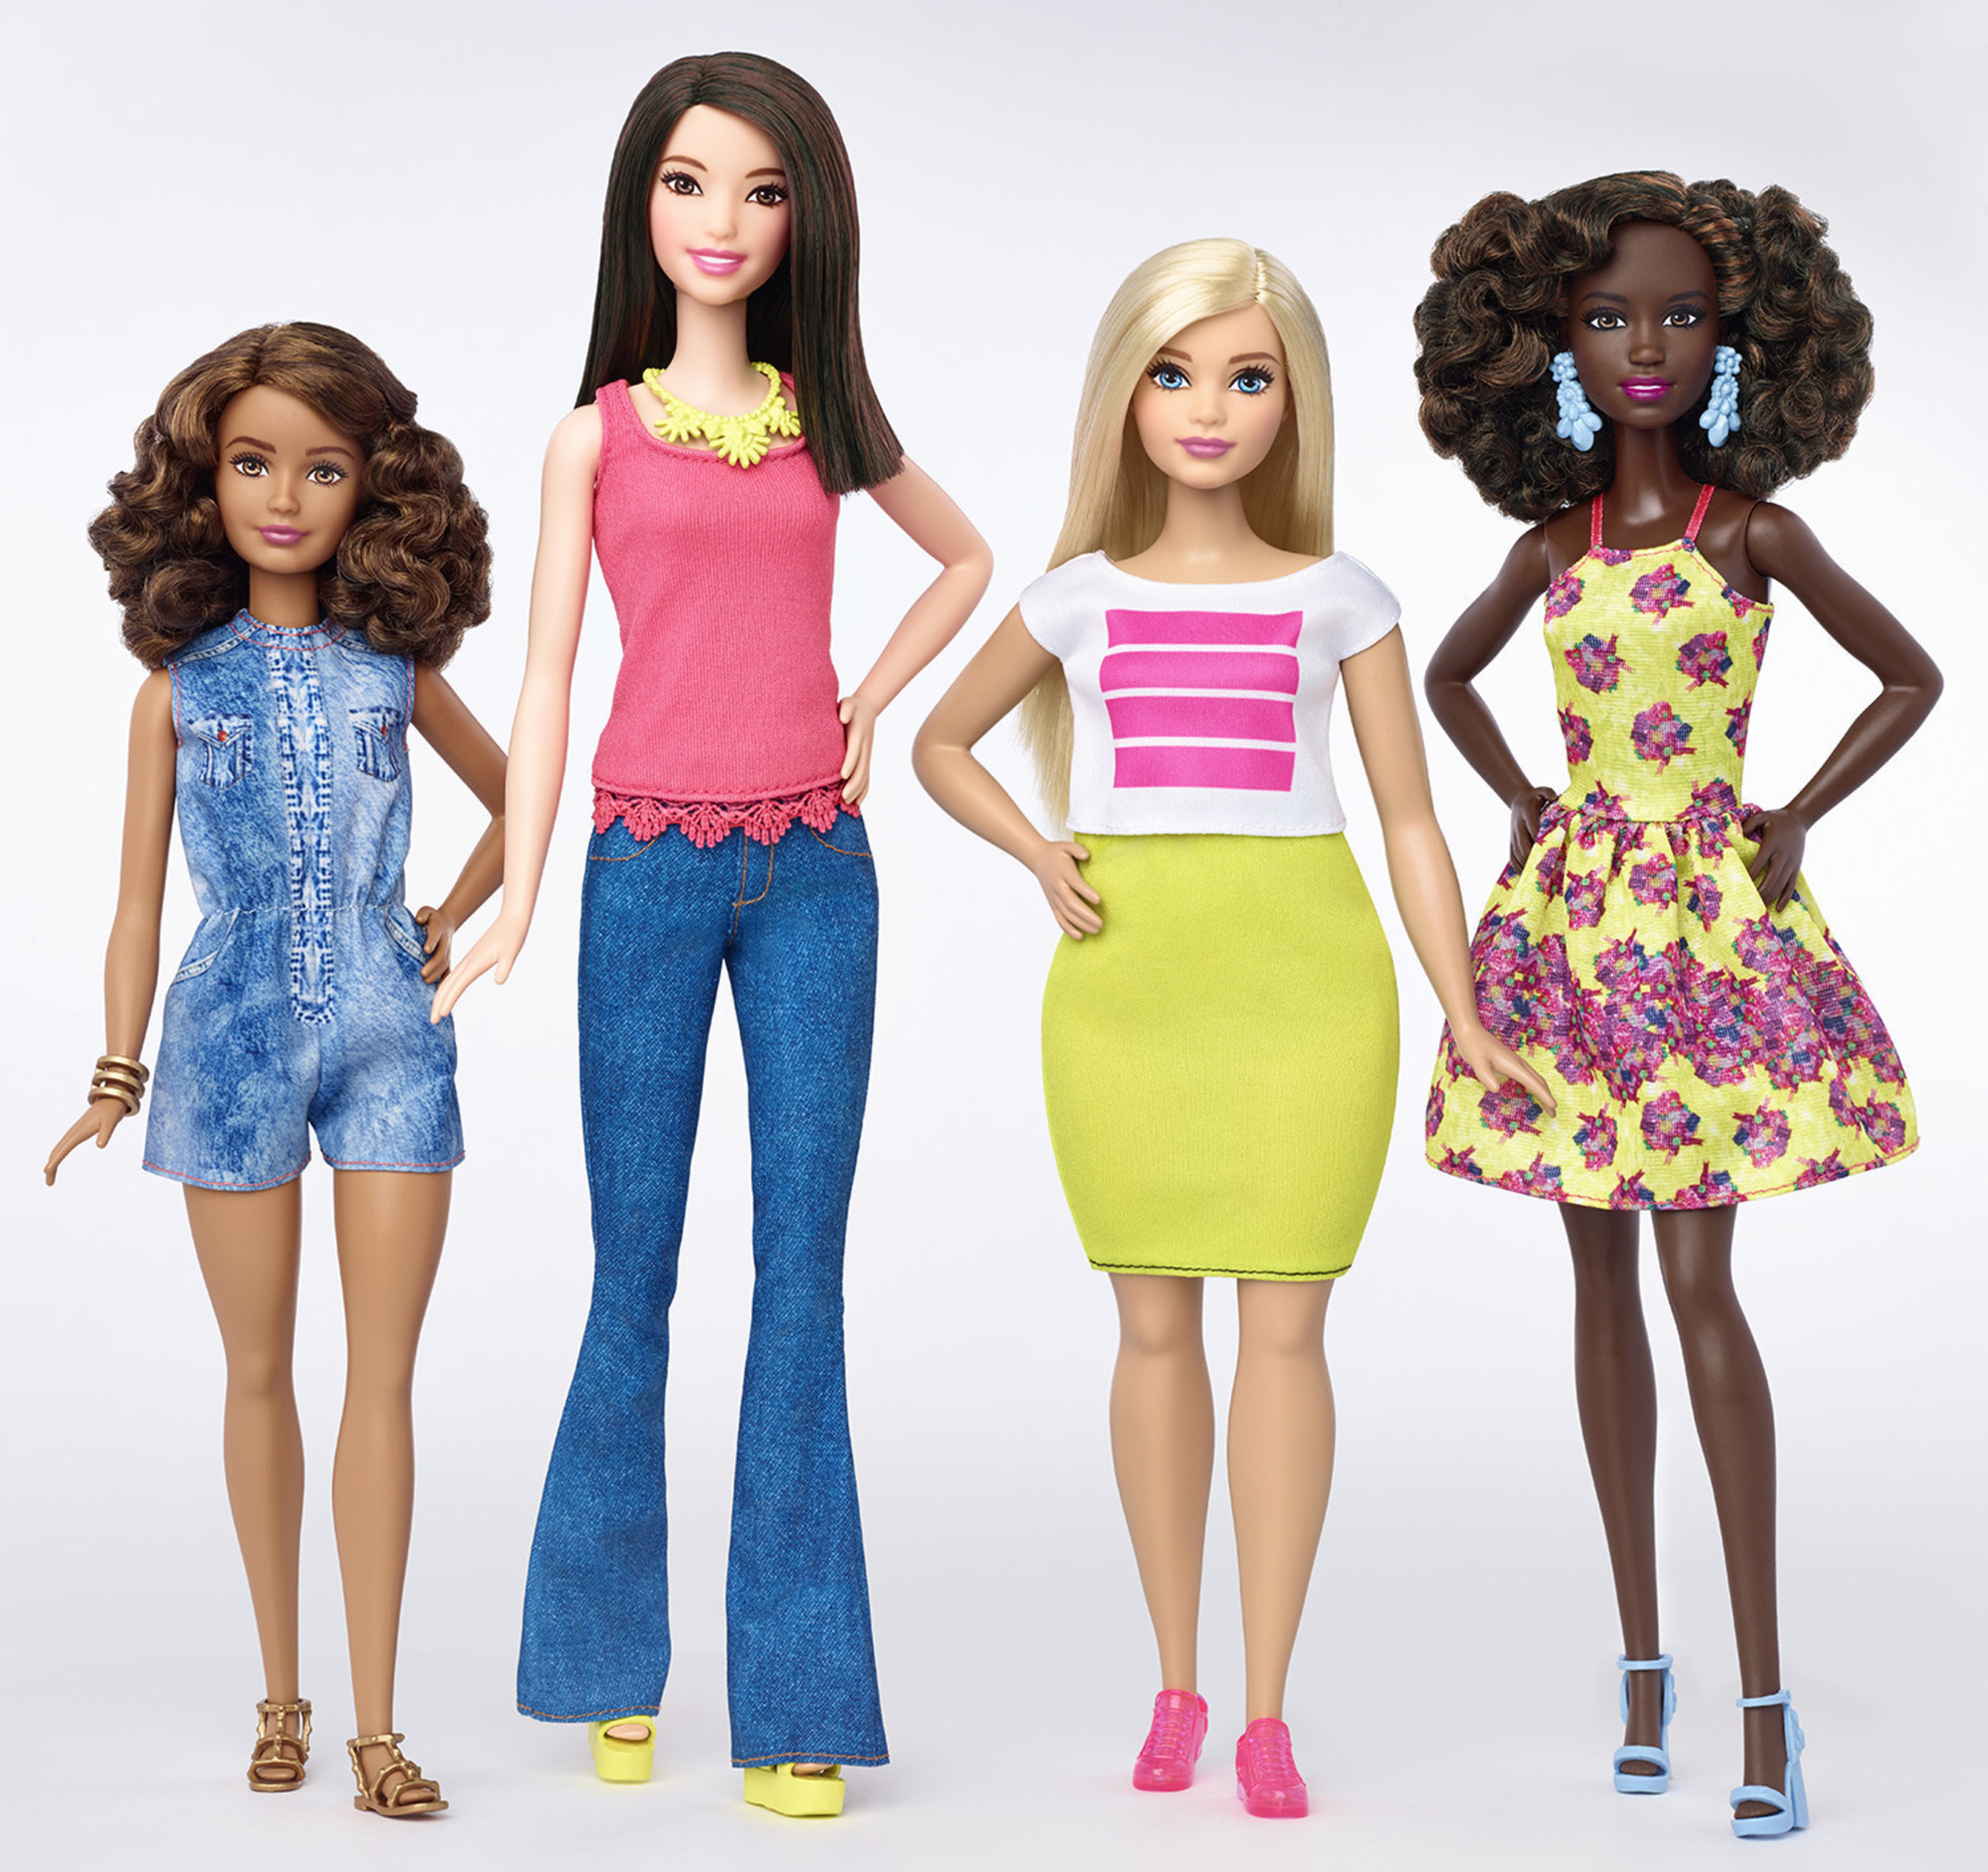 Today, Barbie announced the expansion of its Fashionistas doll line to include three body types - tall, curvy and petite - and a variety of skin tones, hair styles and outfits. With these additions, girls everywhere will have infinitely more ways to play out their stories and spark their imaginations through Barbie.